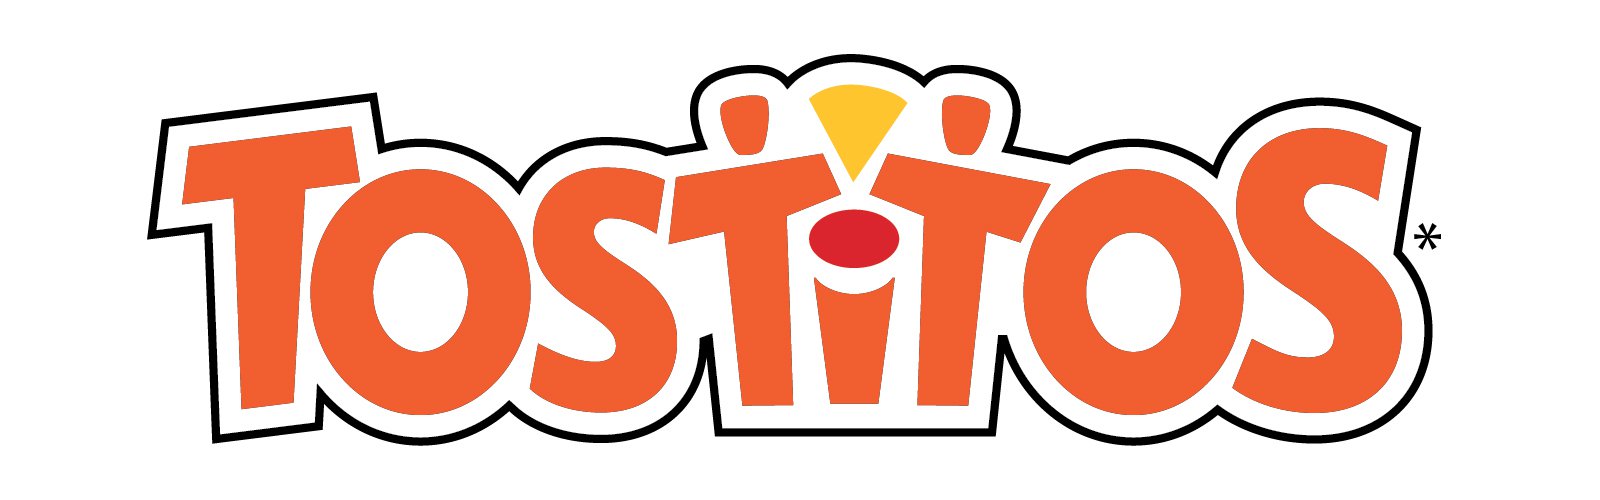 Meaning Tostitos logo and symbol.